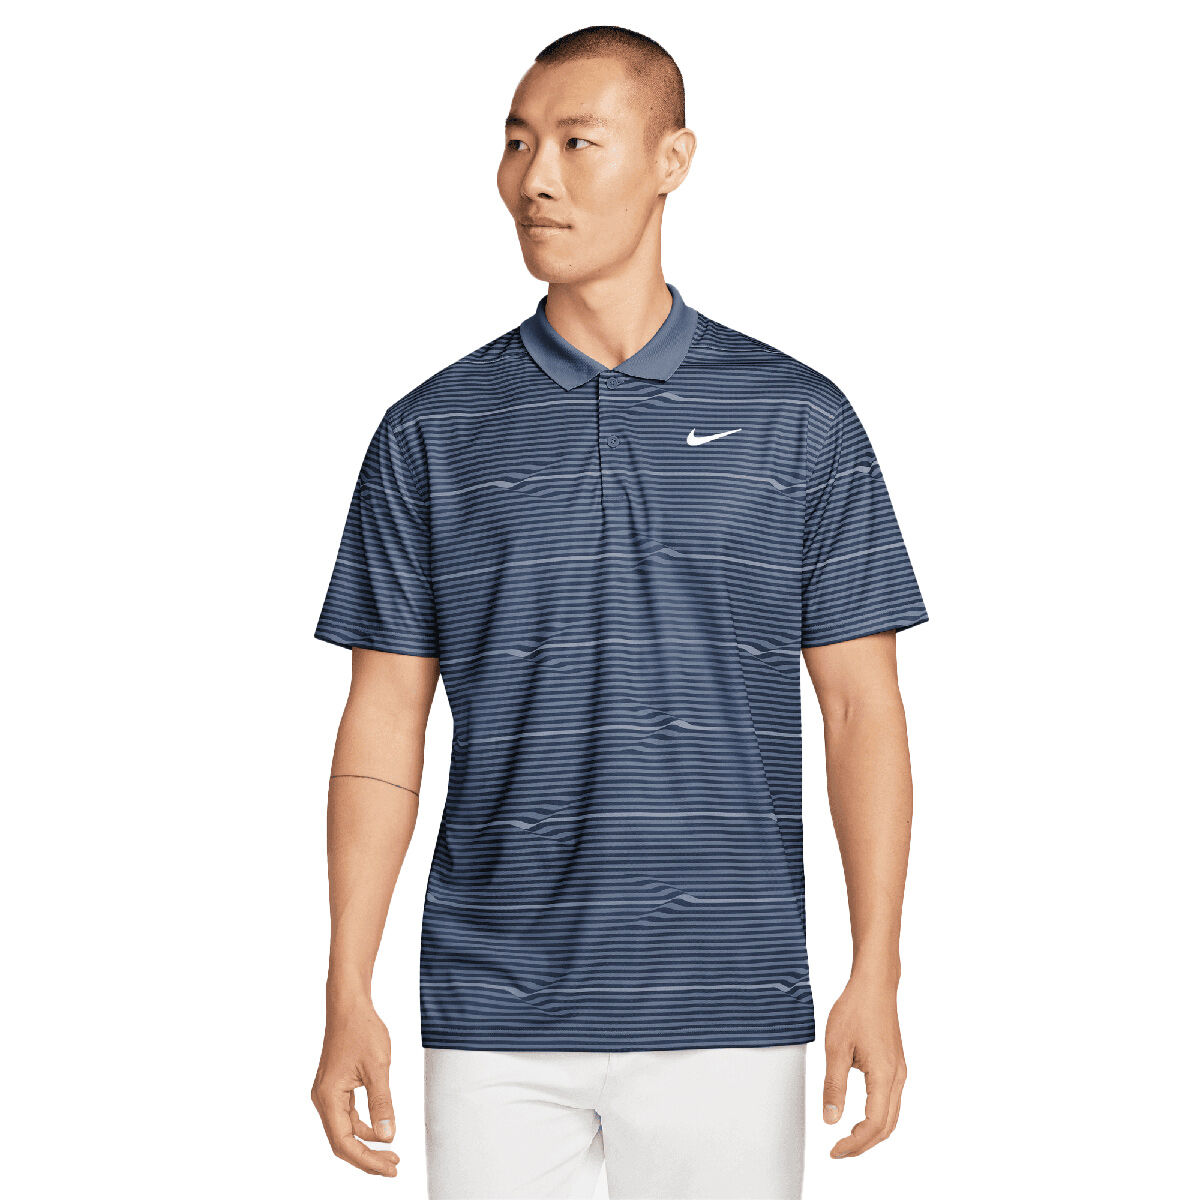 Nike Men’s Victory+ Ripple Golf Polo Shirt, Mens, Midnight navy/diffused blue/wh, Xl | American Golf